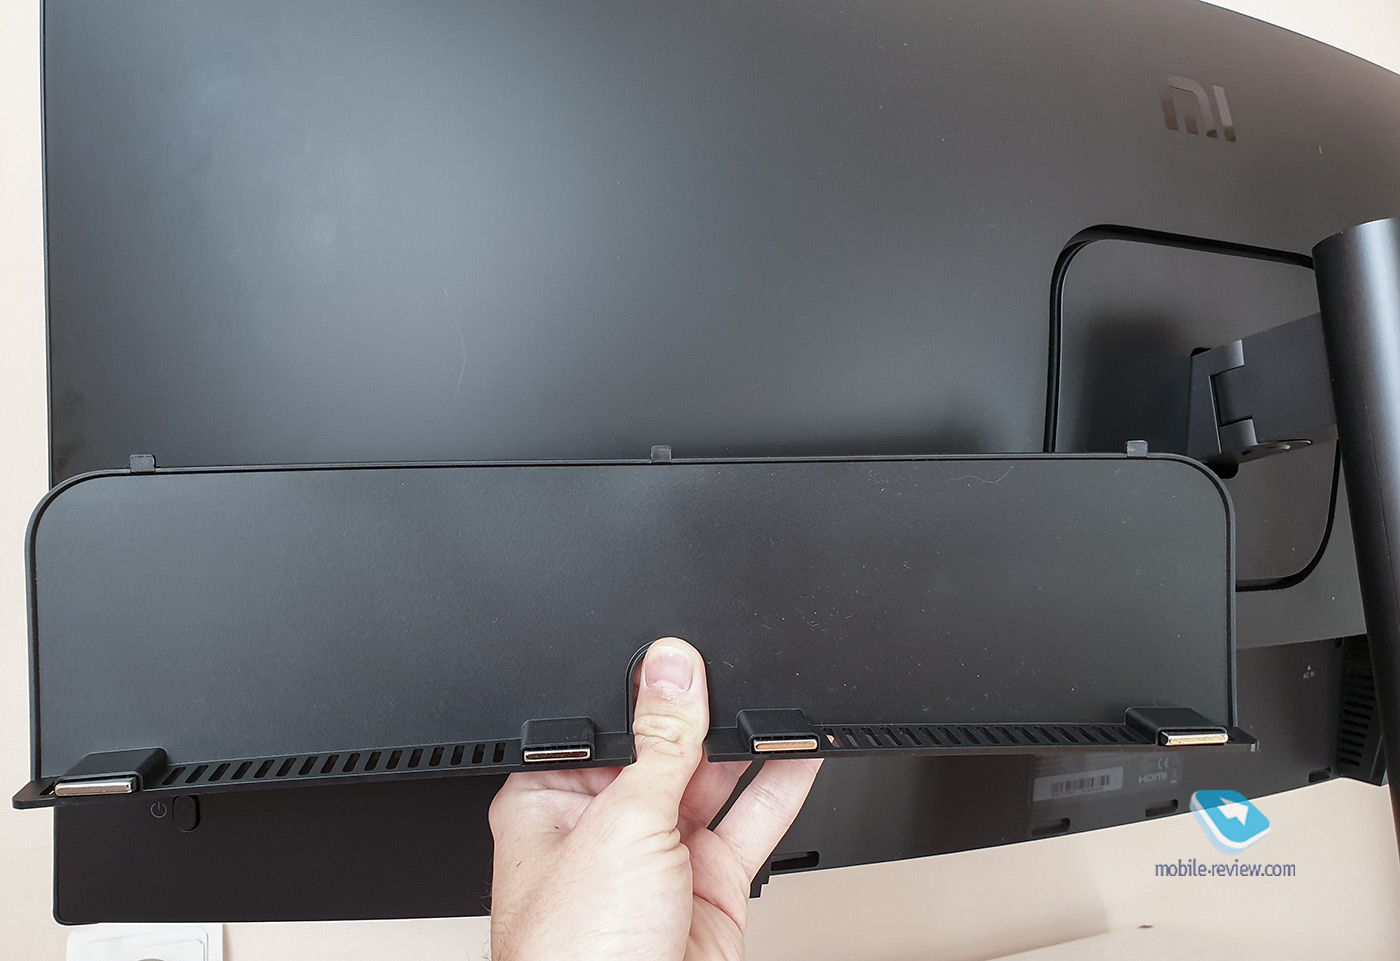 Everything you need to know about Xiaomi Mi Curved 34 Gaming Monitor